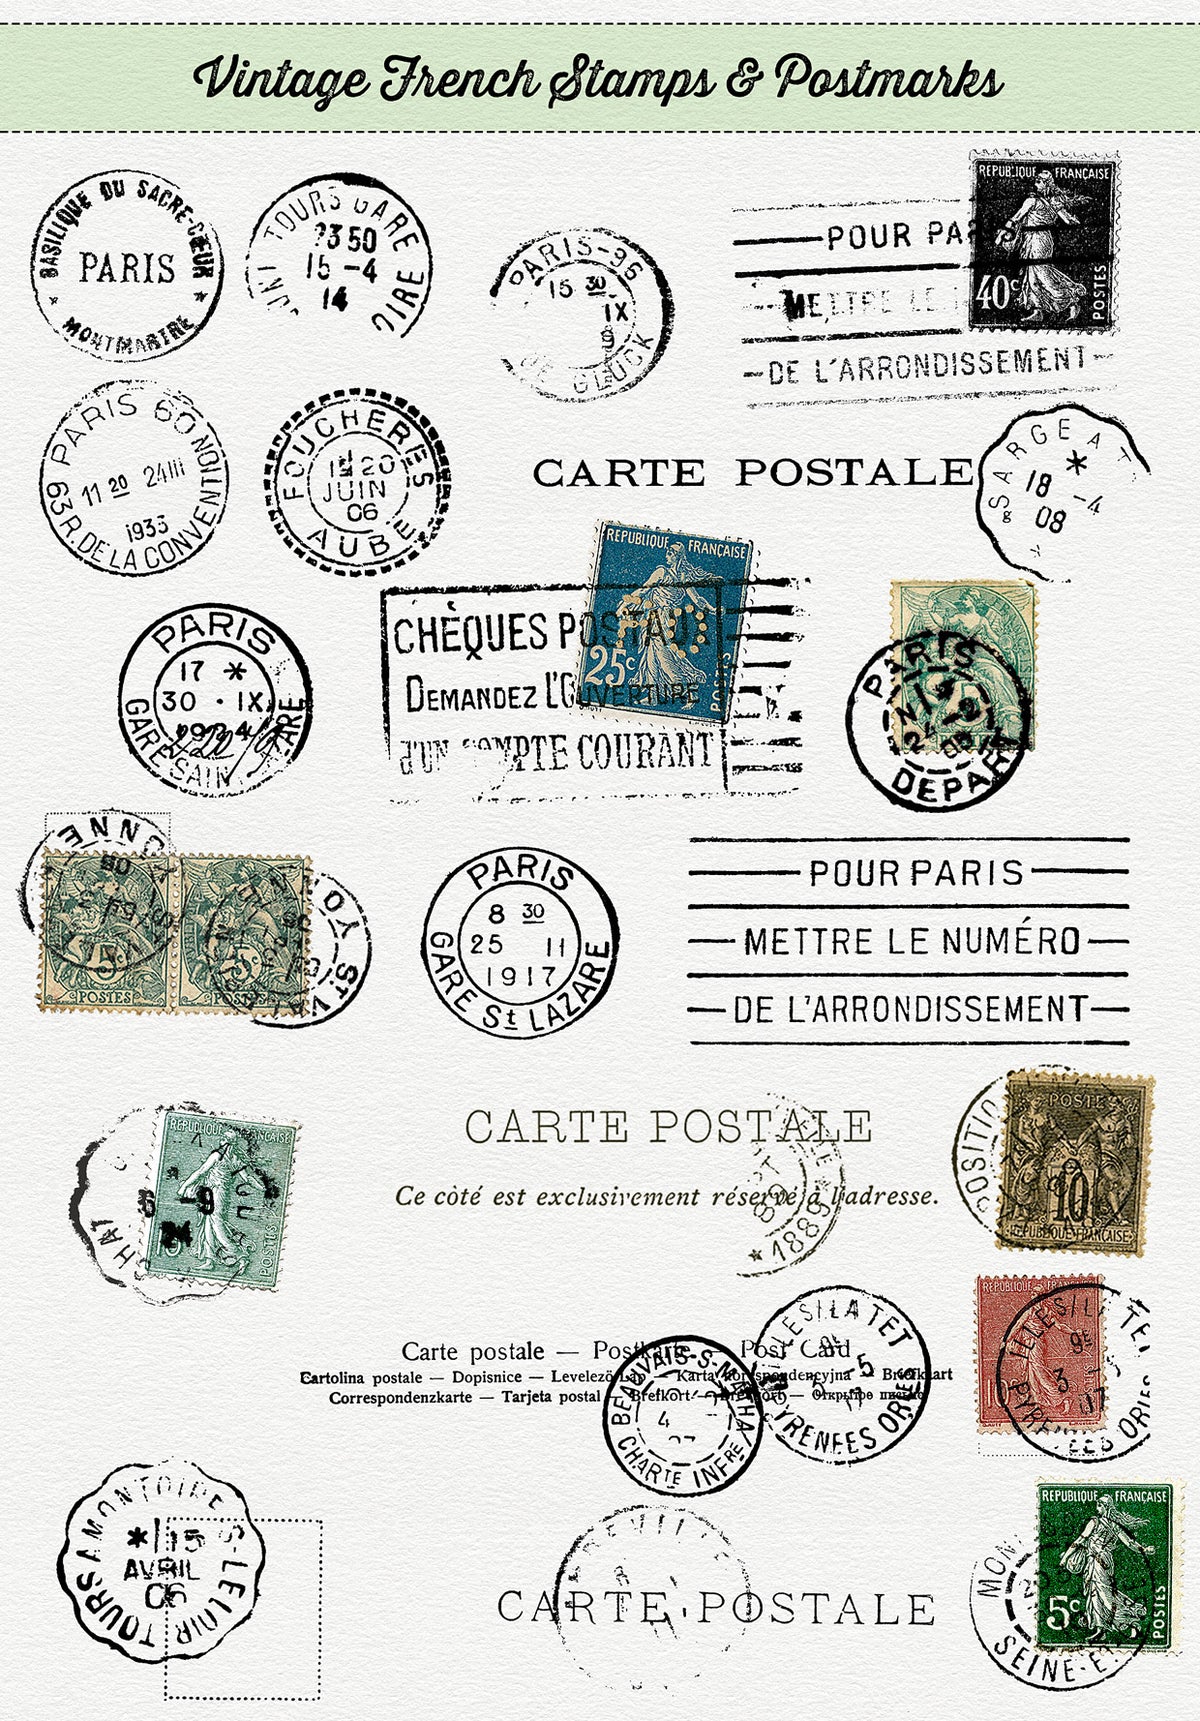 Vintage French stamps and postmarks digital overlays from The Essential Vintage French Graphics Collection.